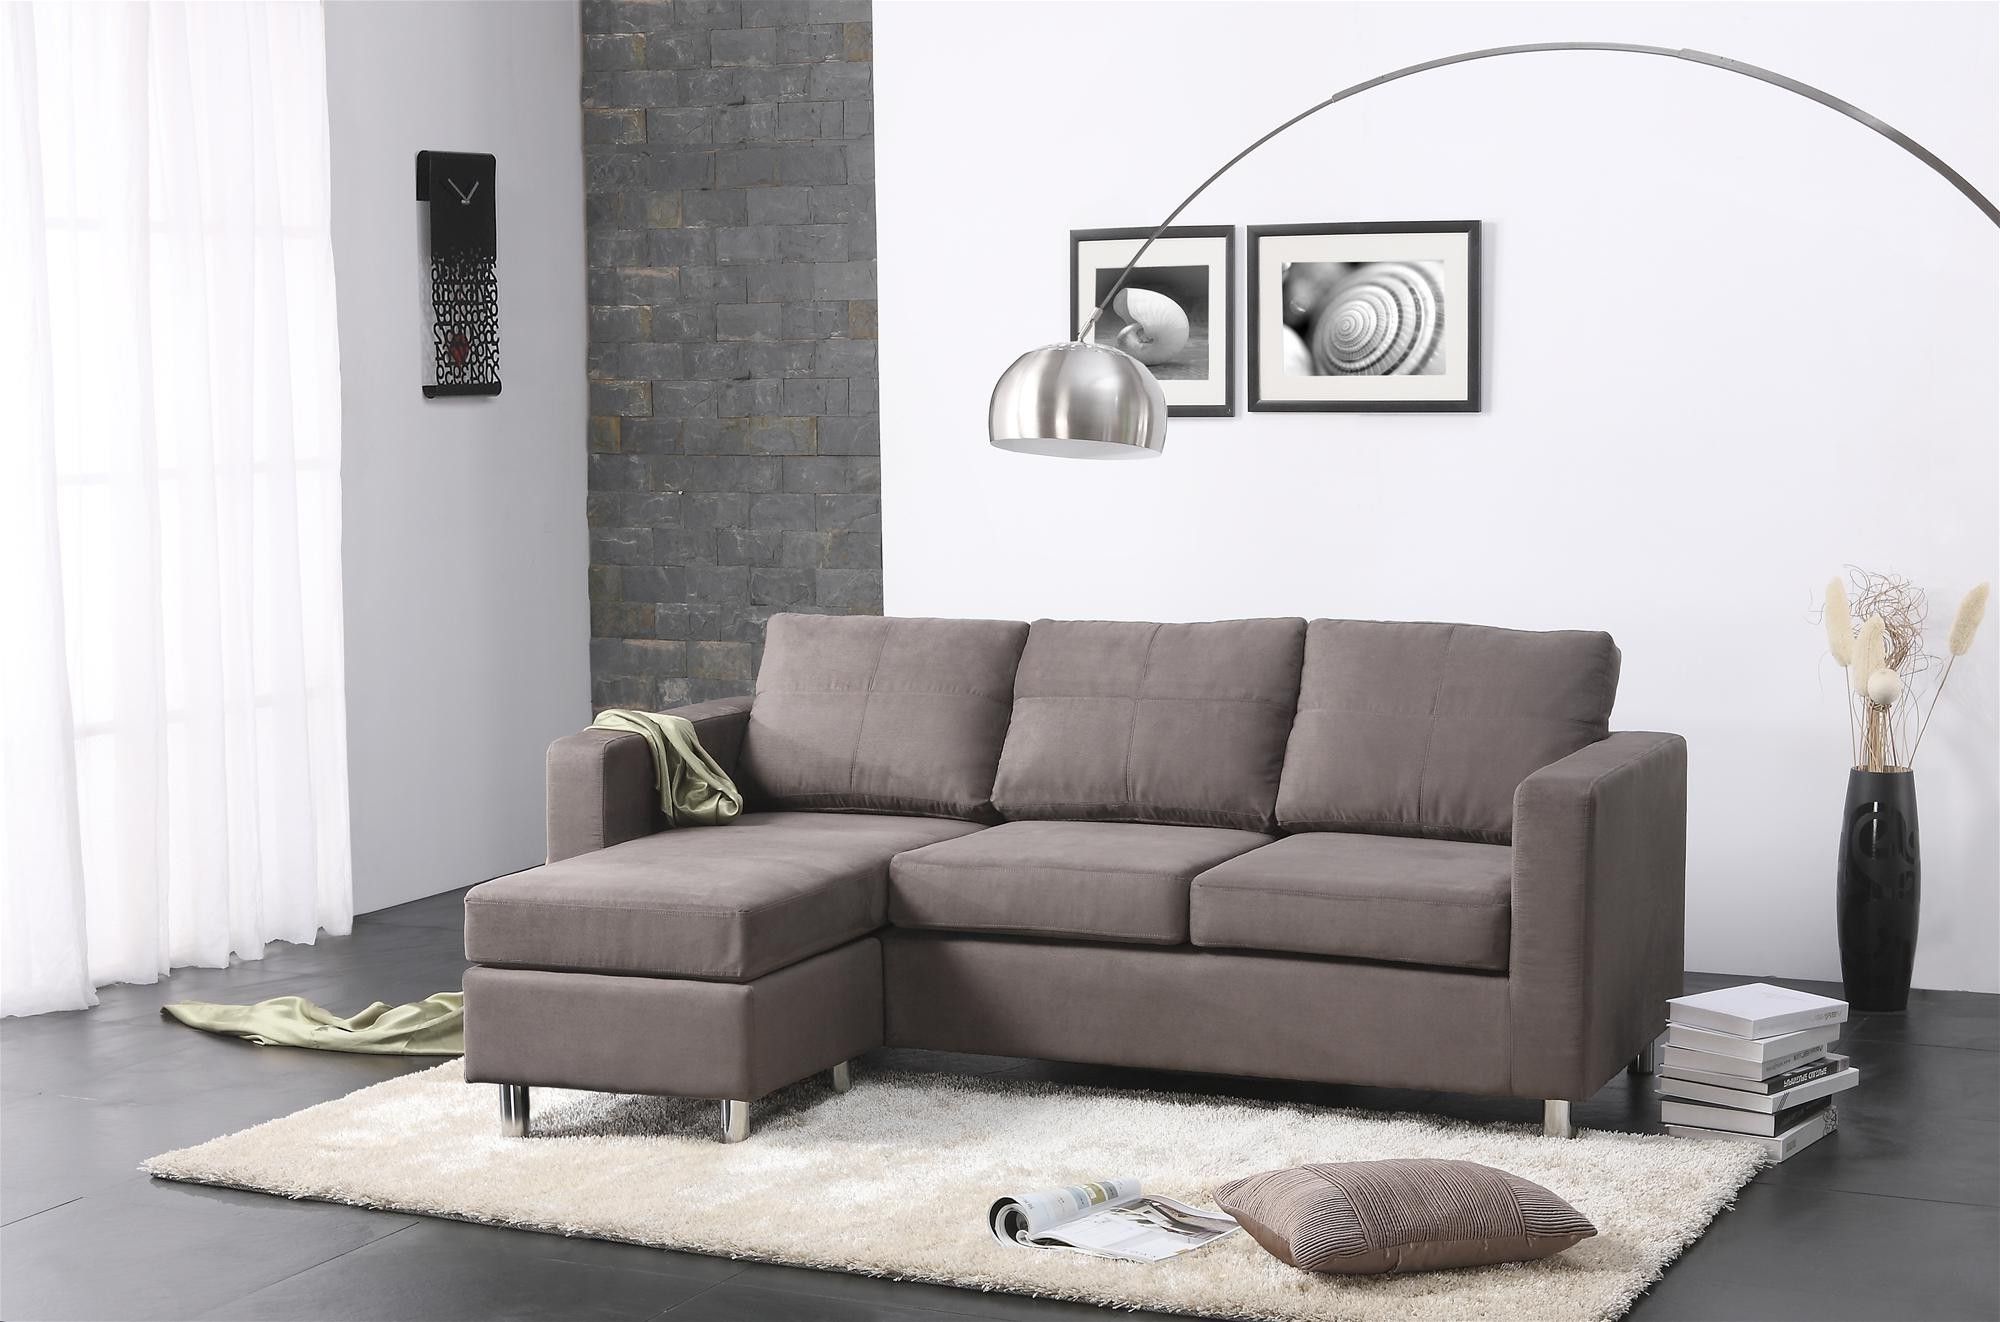 Small Living Room With Chaise Lounge